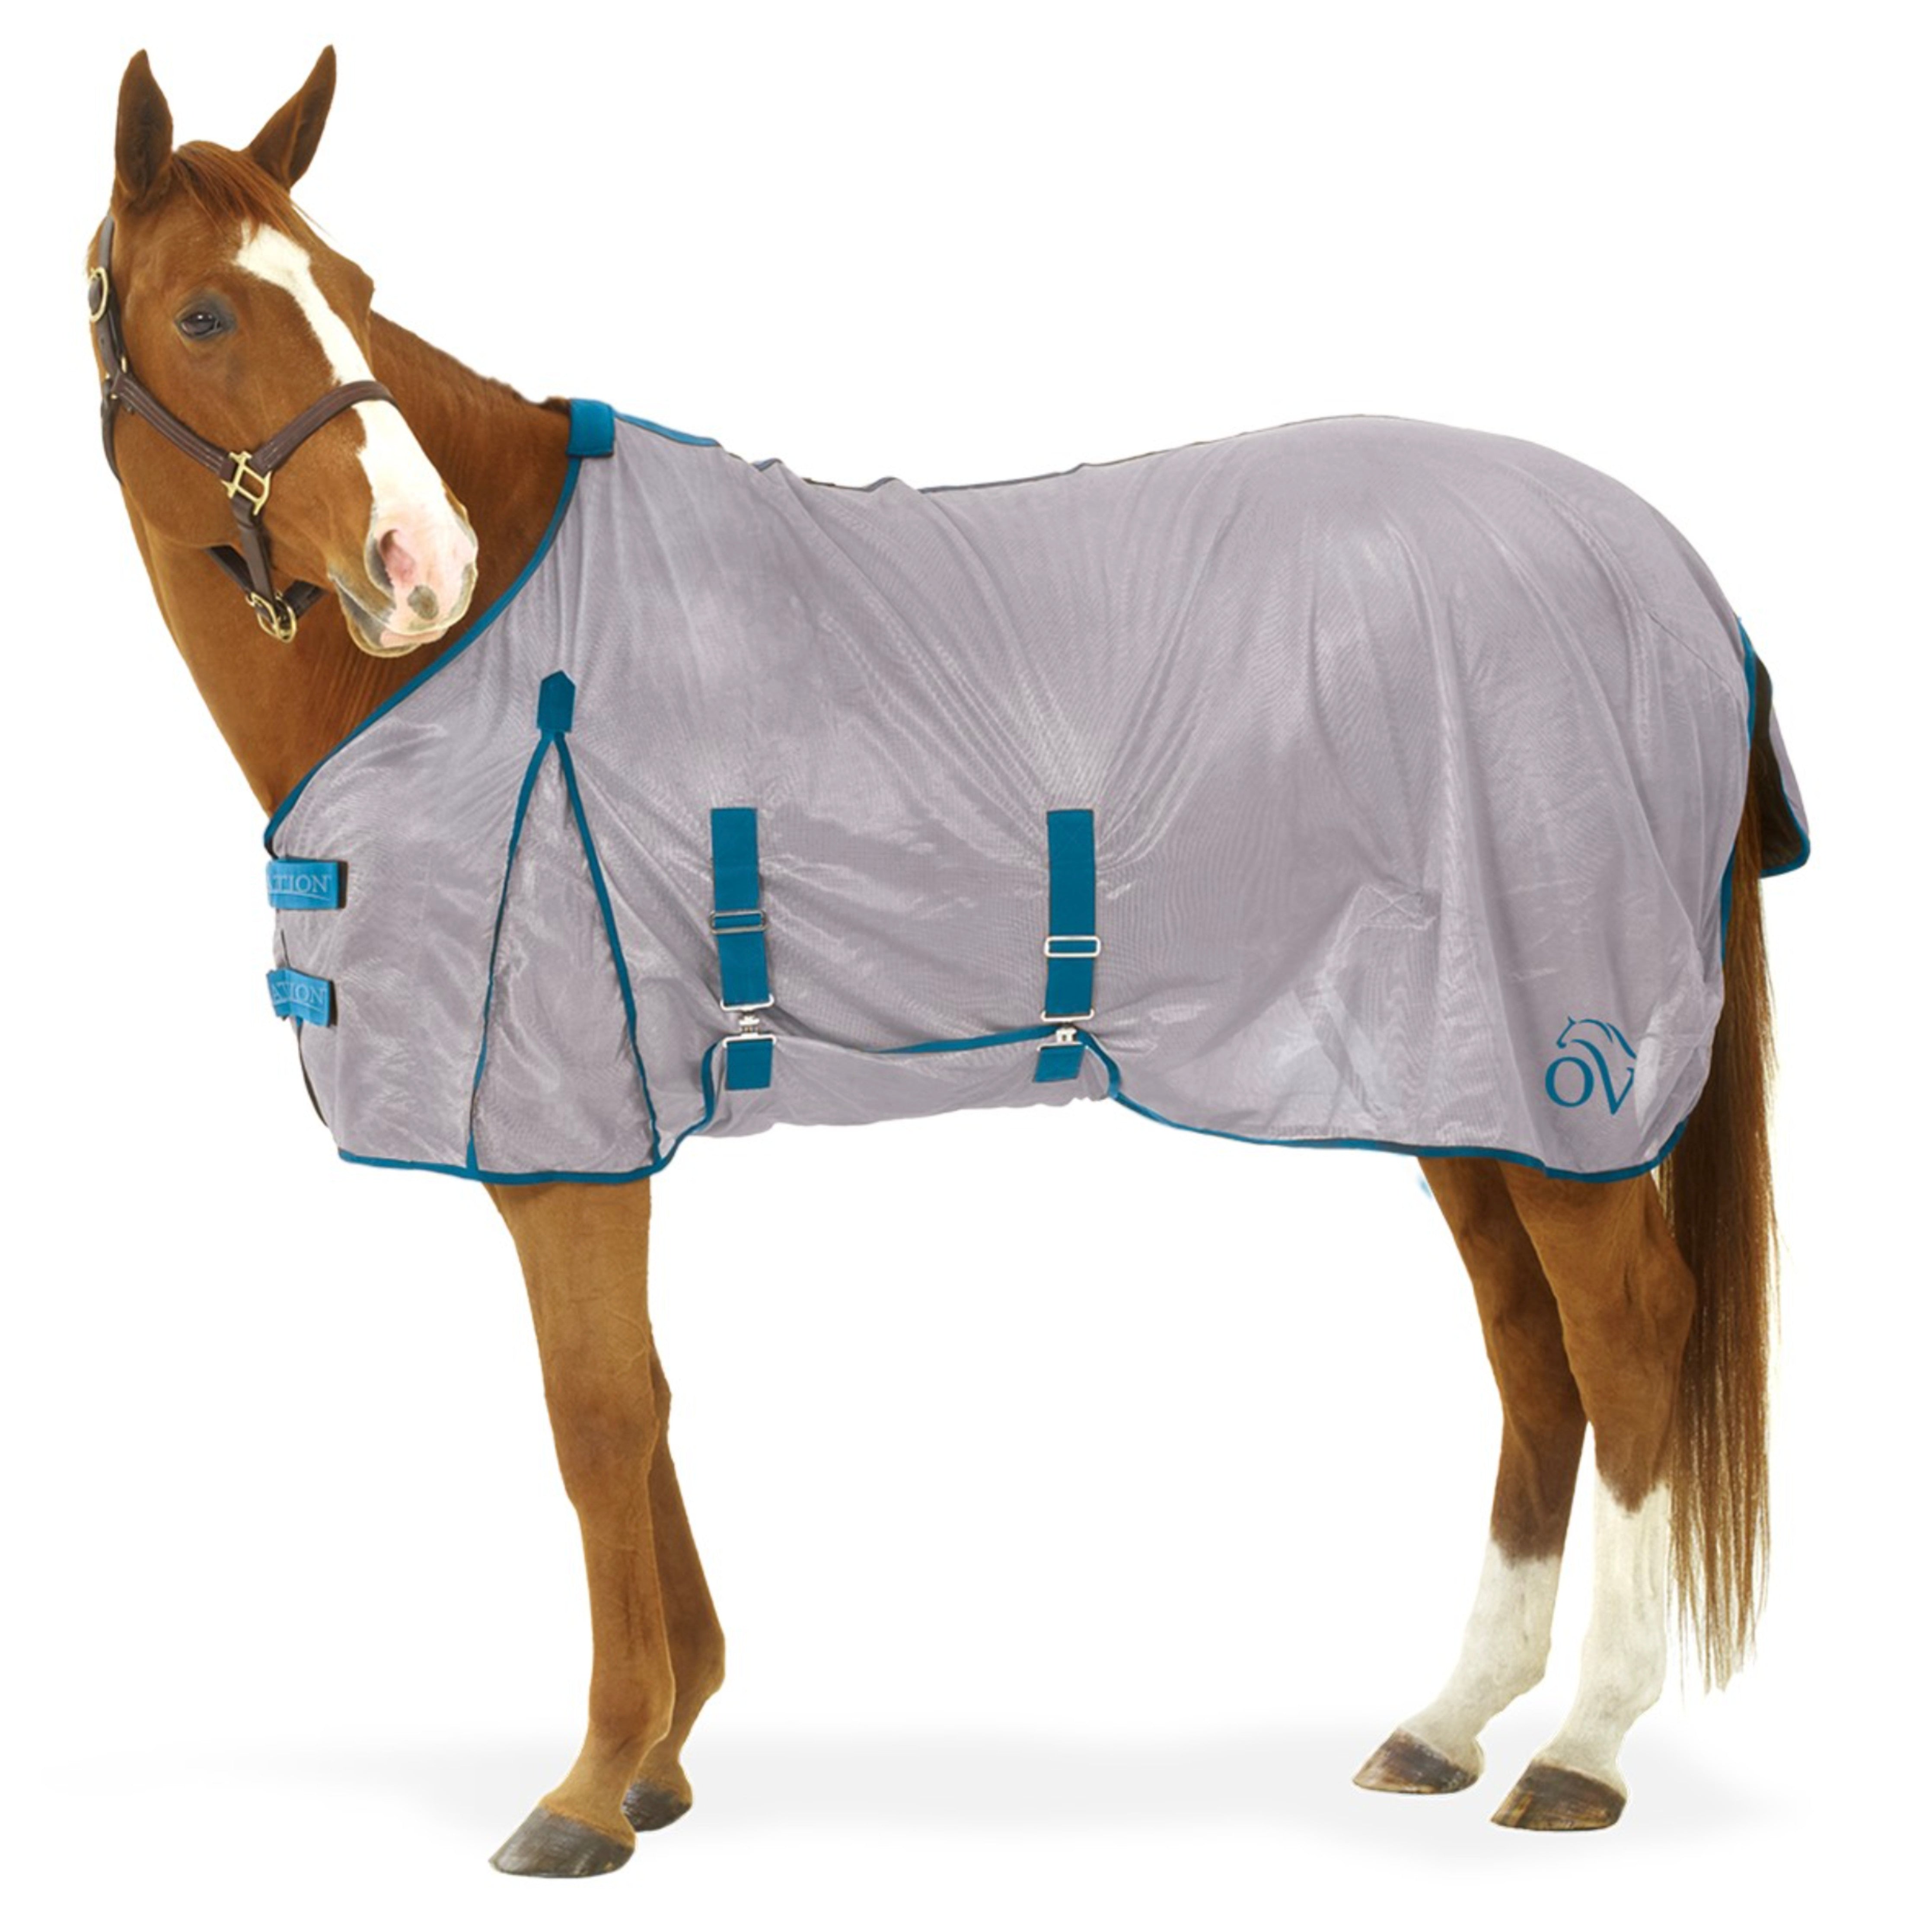 Ovation Super Fly Sheet w/ Belly Cover